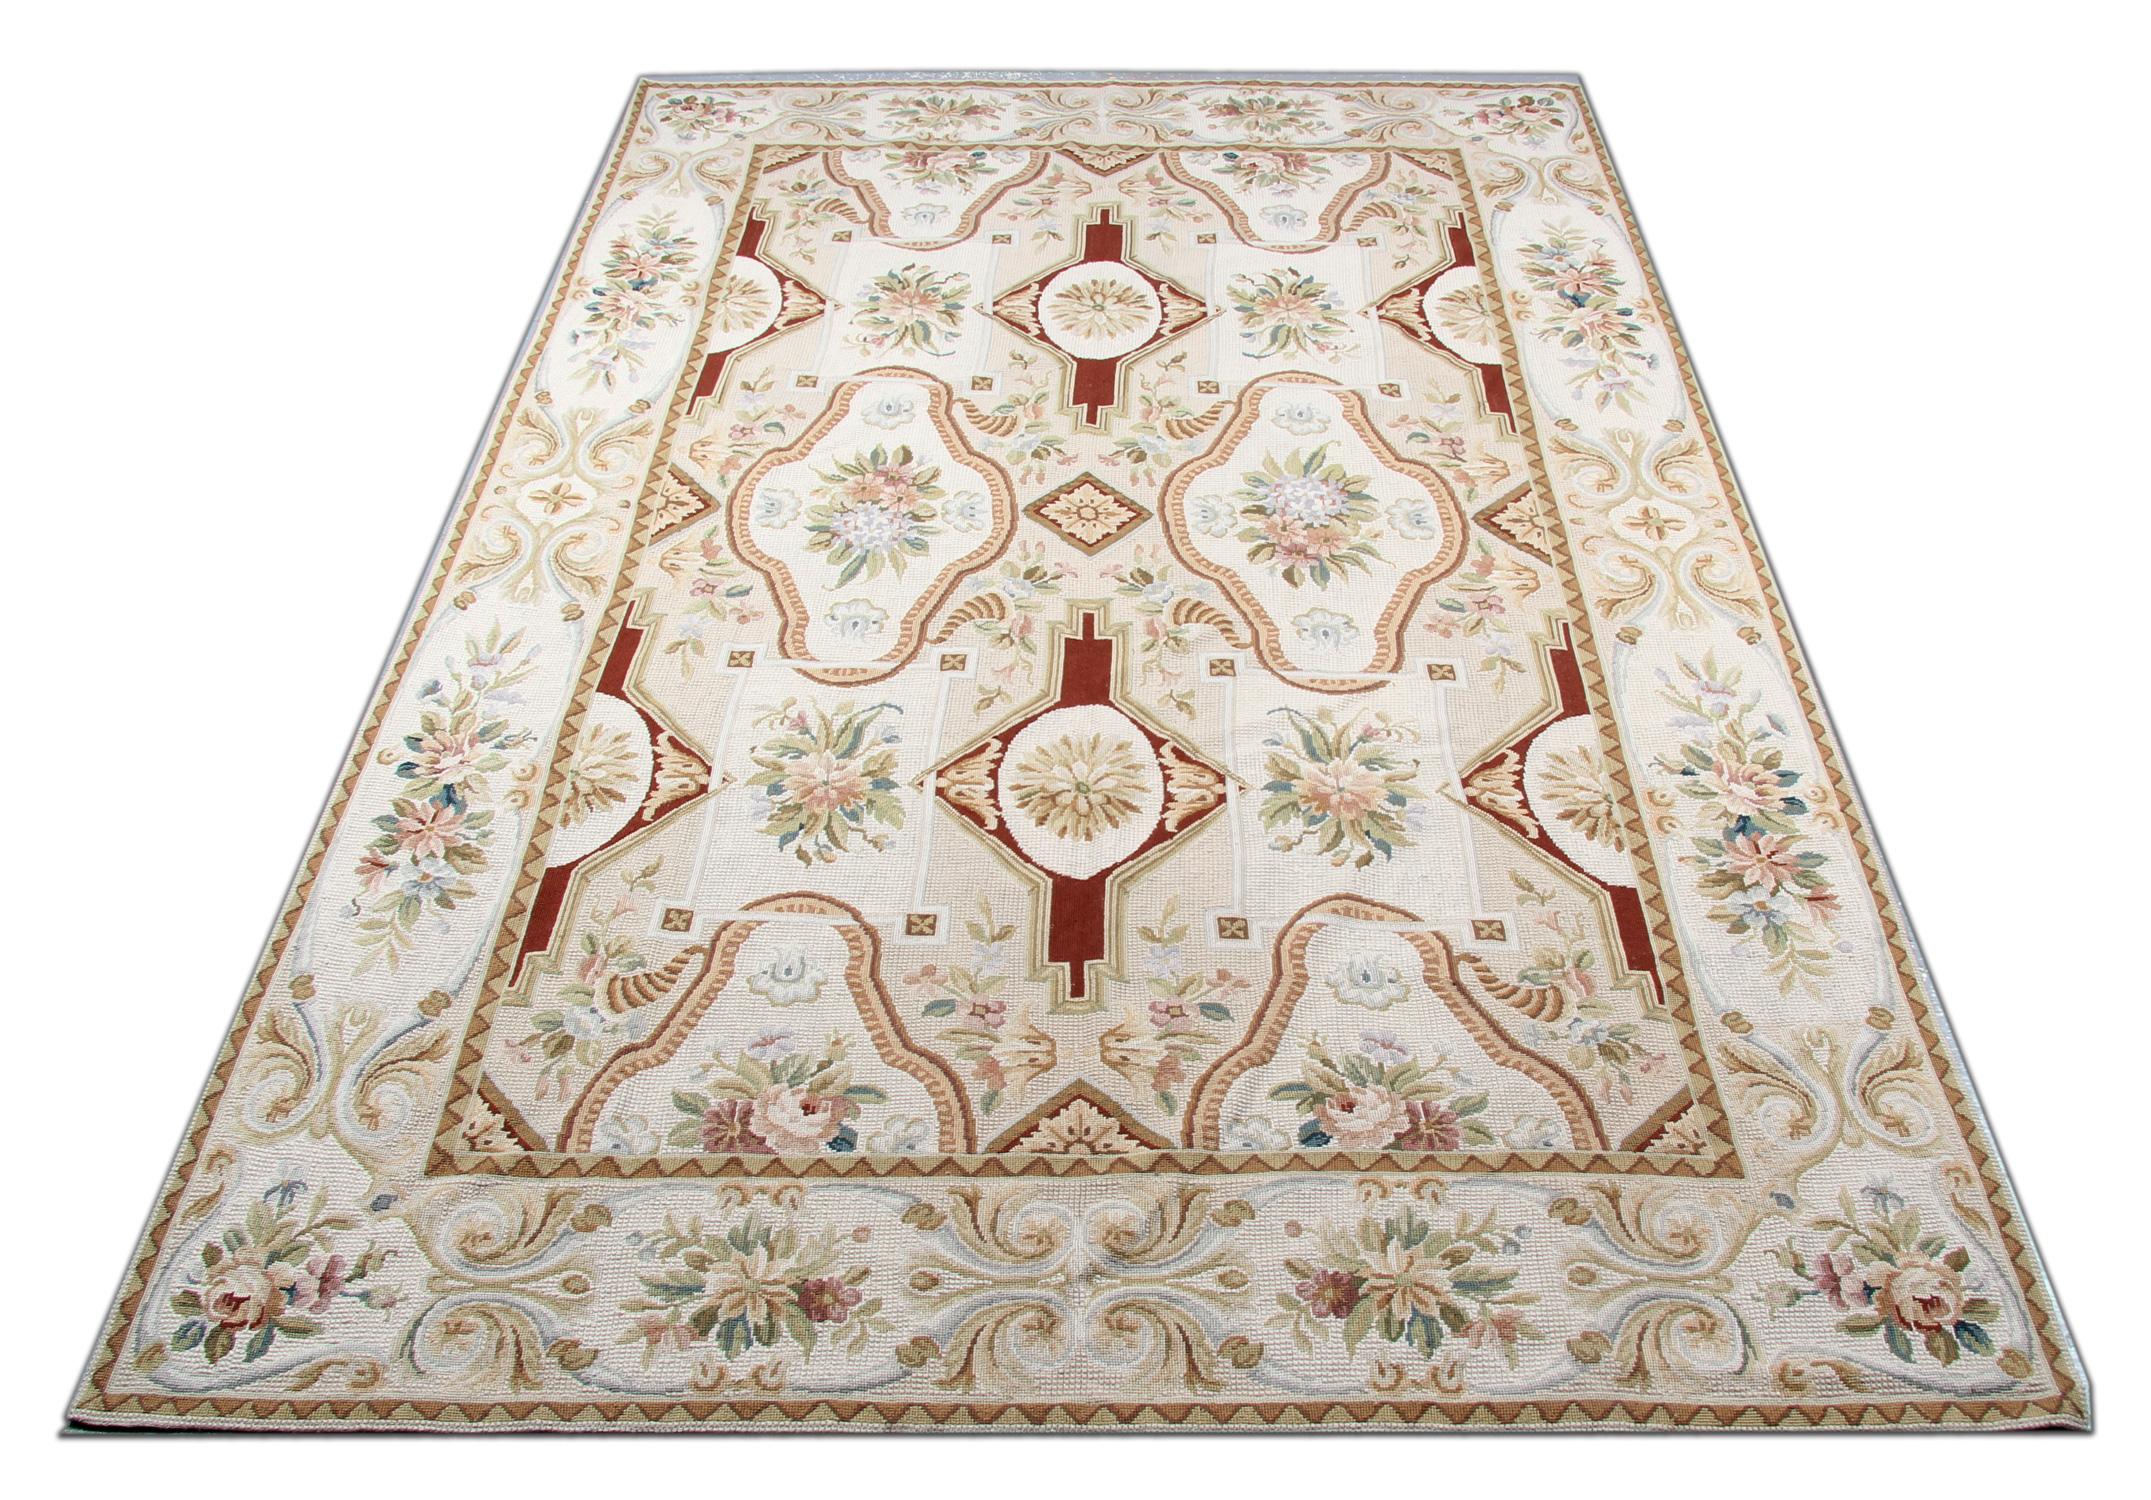 This unique handwoven needlepoint has been constructed with a fantastic color palette of ivory, brown, green and peach. The colors come together to create a beautiful symmetrical floral pattern, designed with sophistication for the perfect wall or